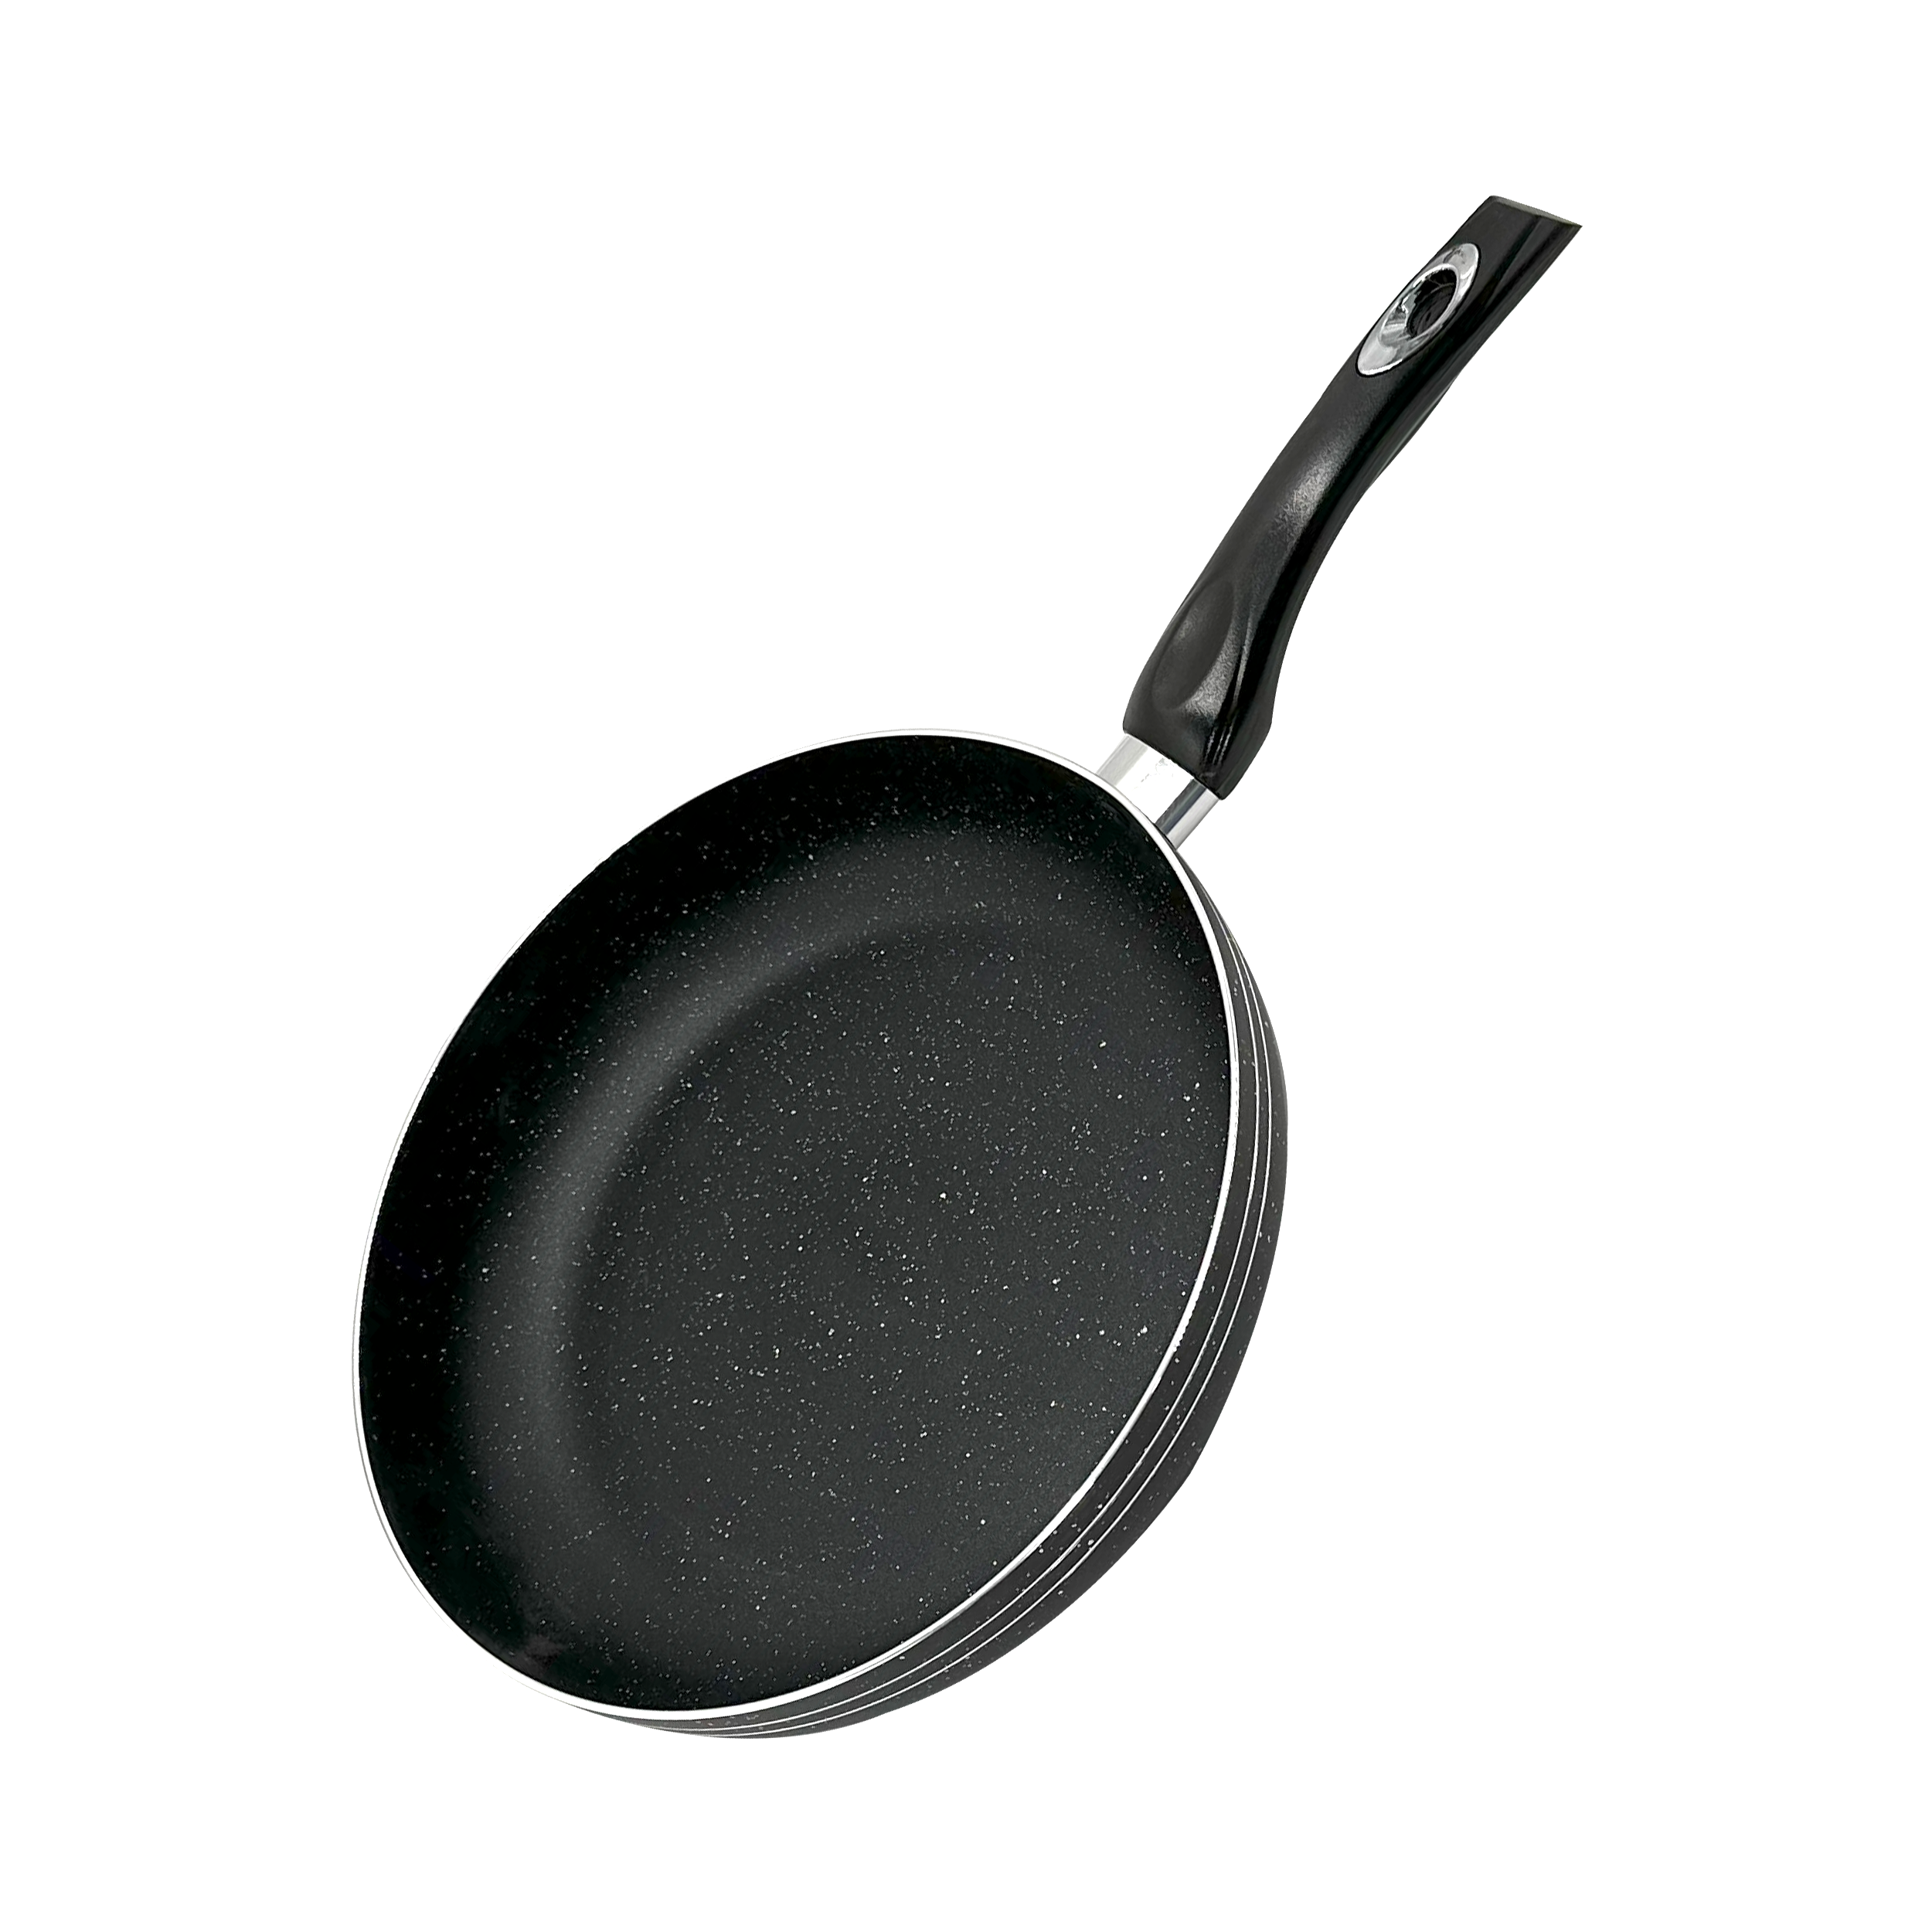 JS Marble Non-Stick Induction Base Frying Pan - 32cm